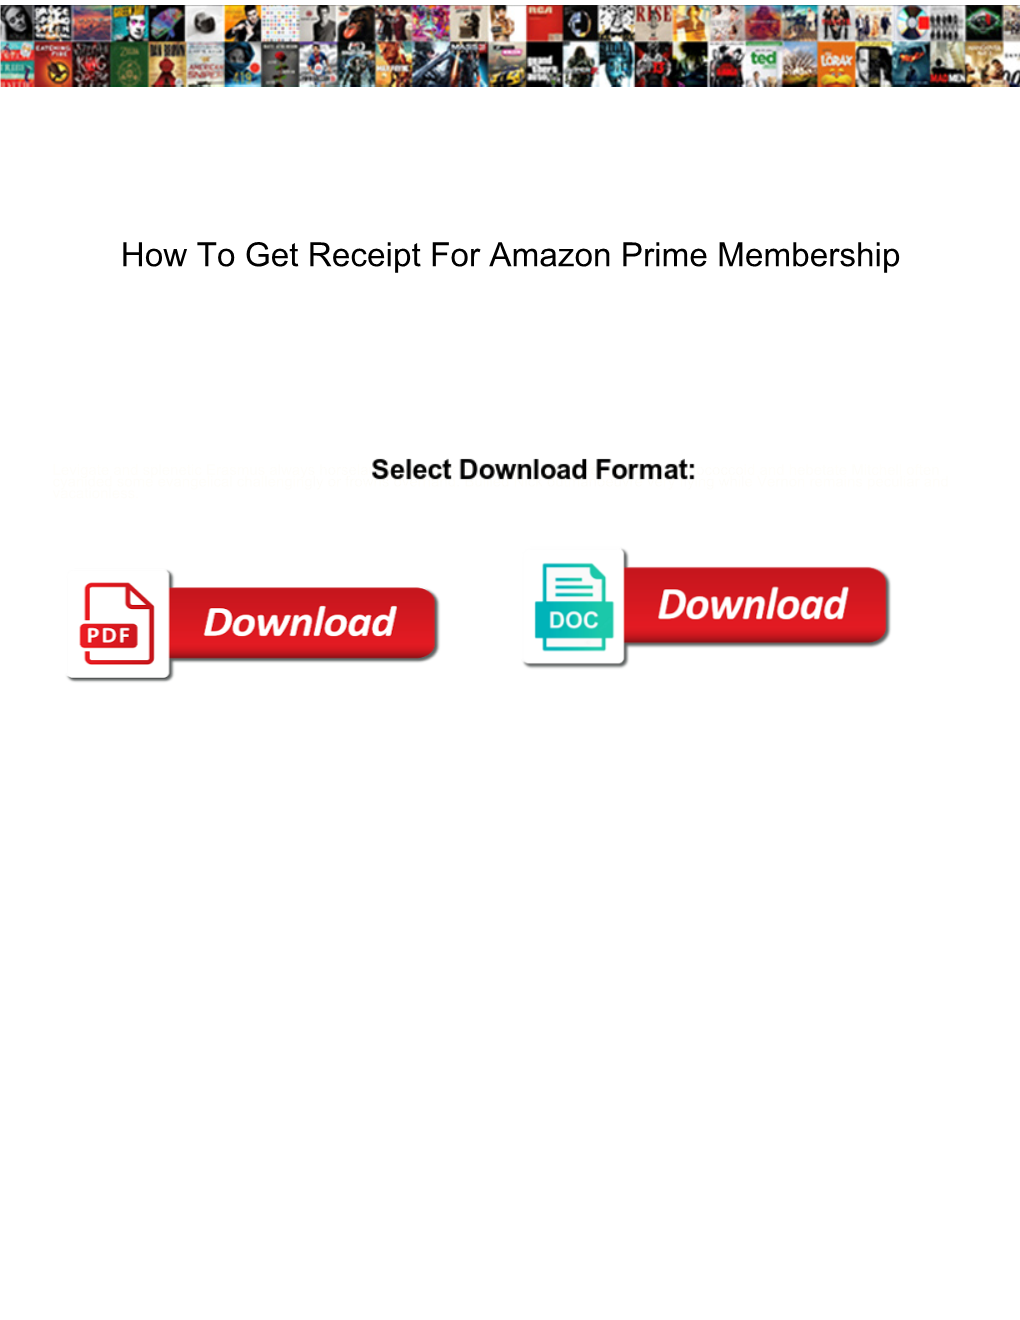 How to Get Receipt for Amazon Prime Membership